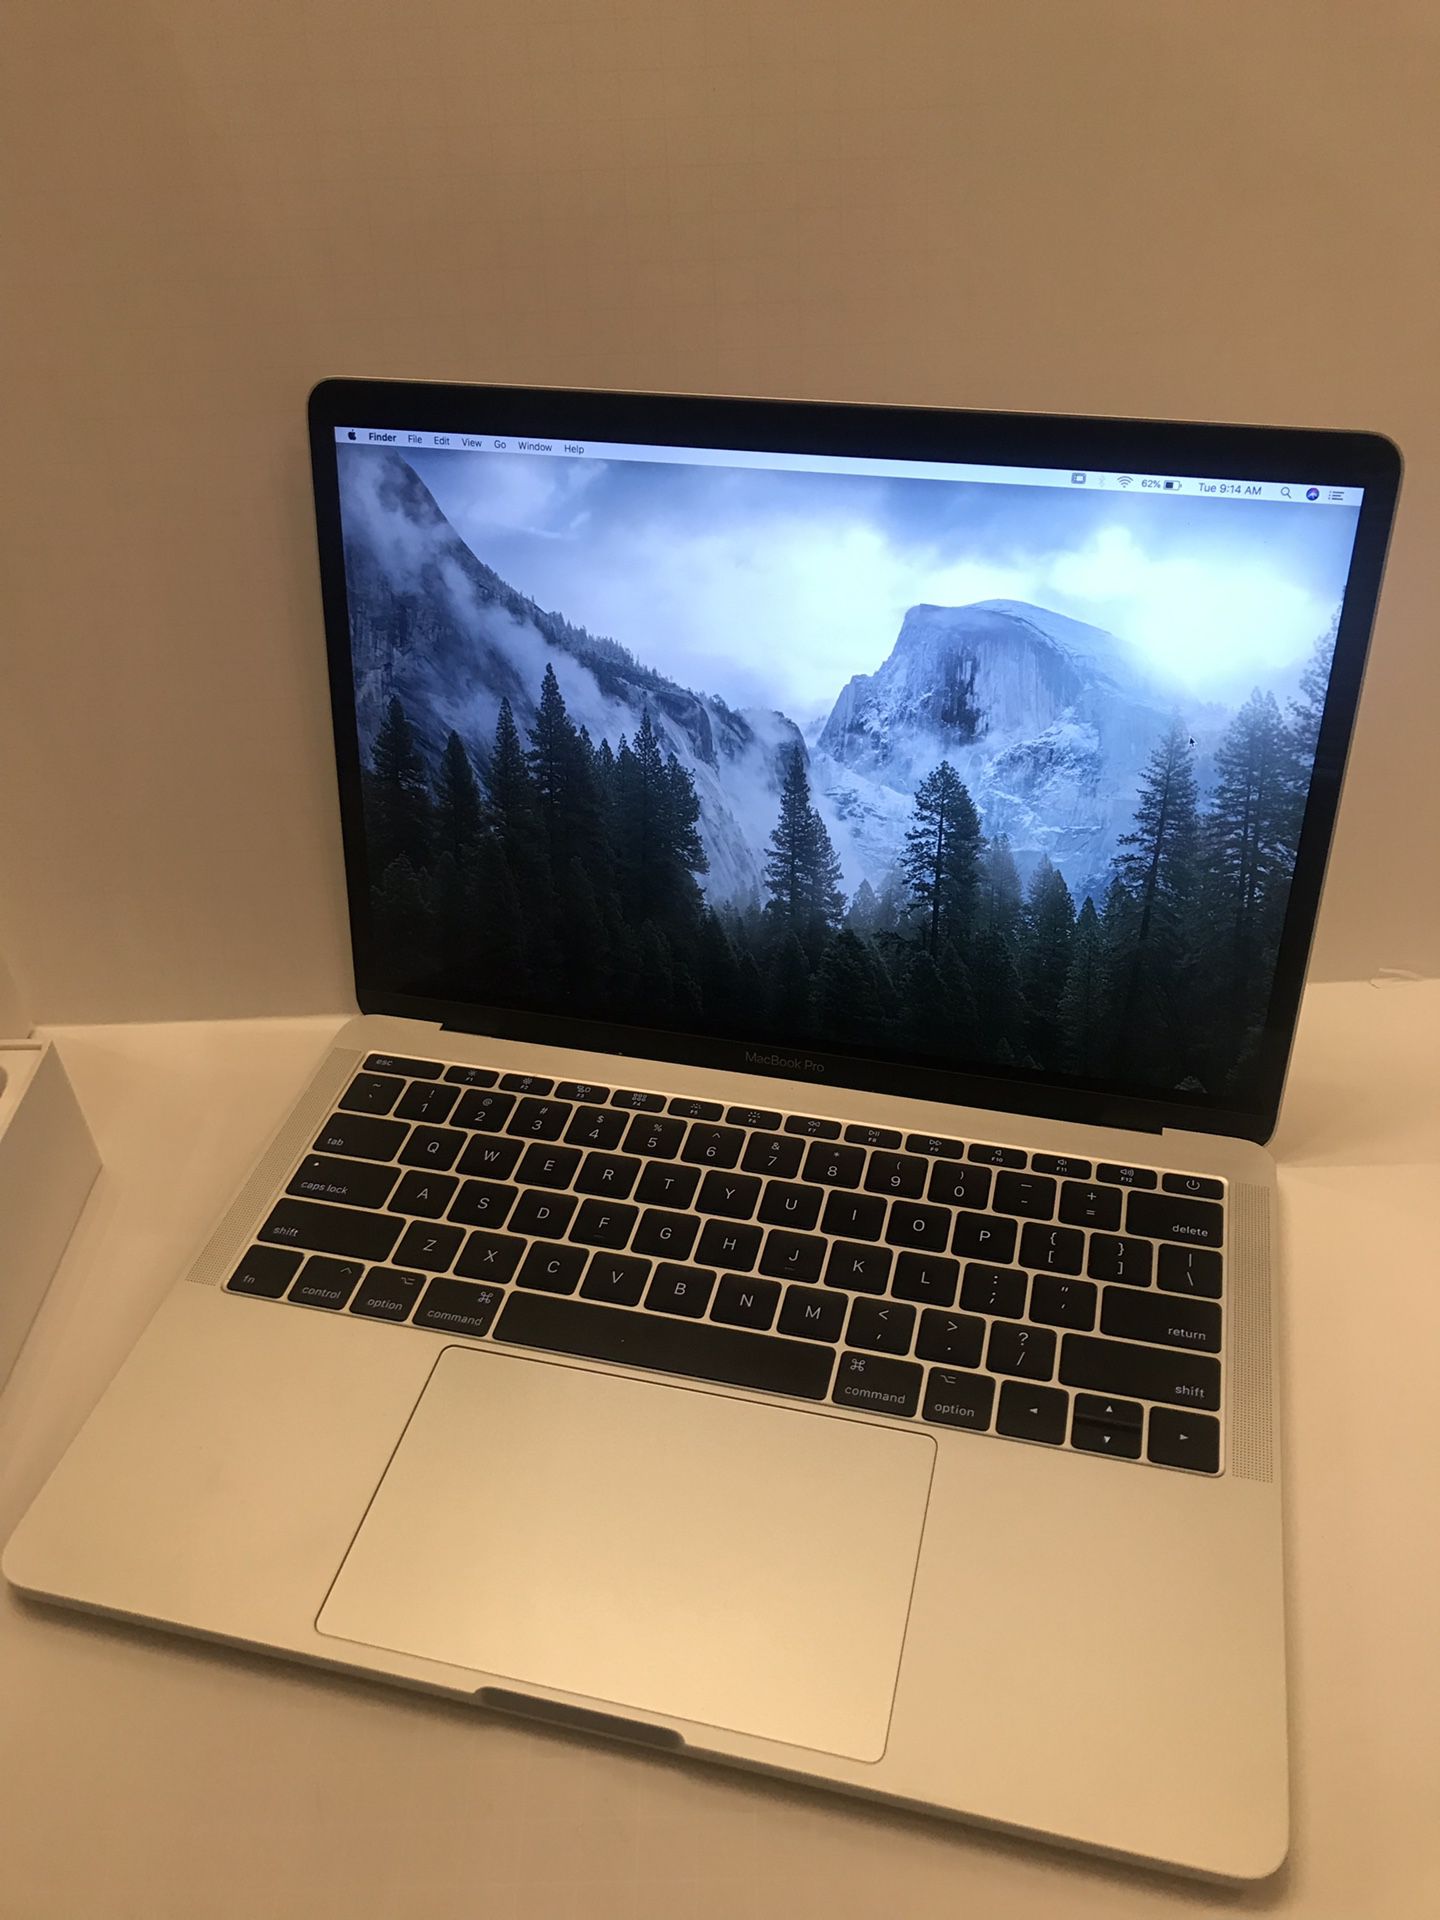 2017 MacBook Pro 13-inch with usb-c adapter $800 or best offer